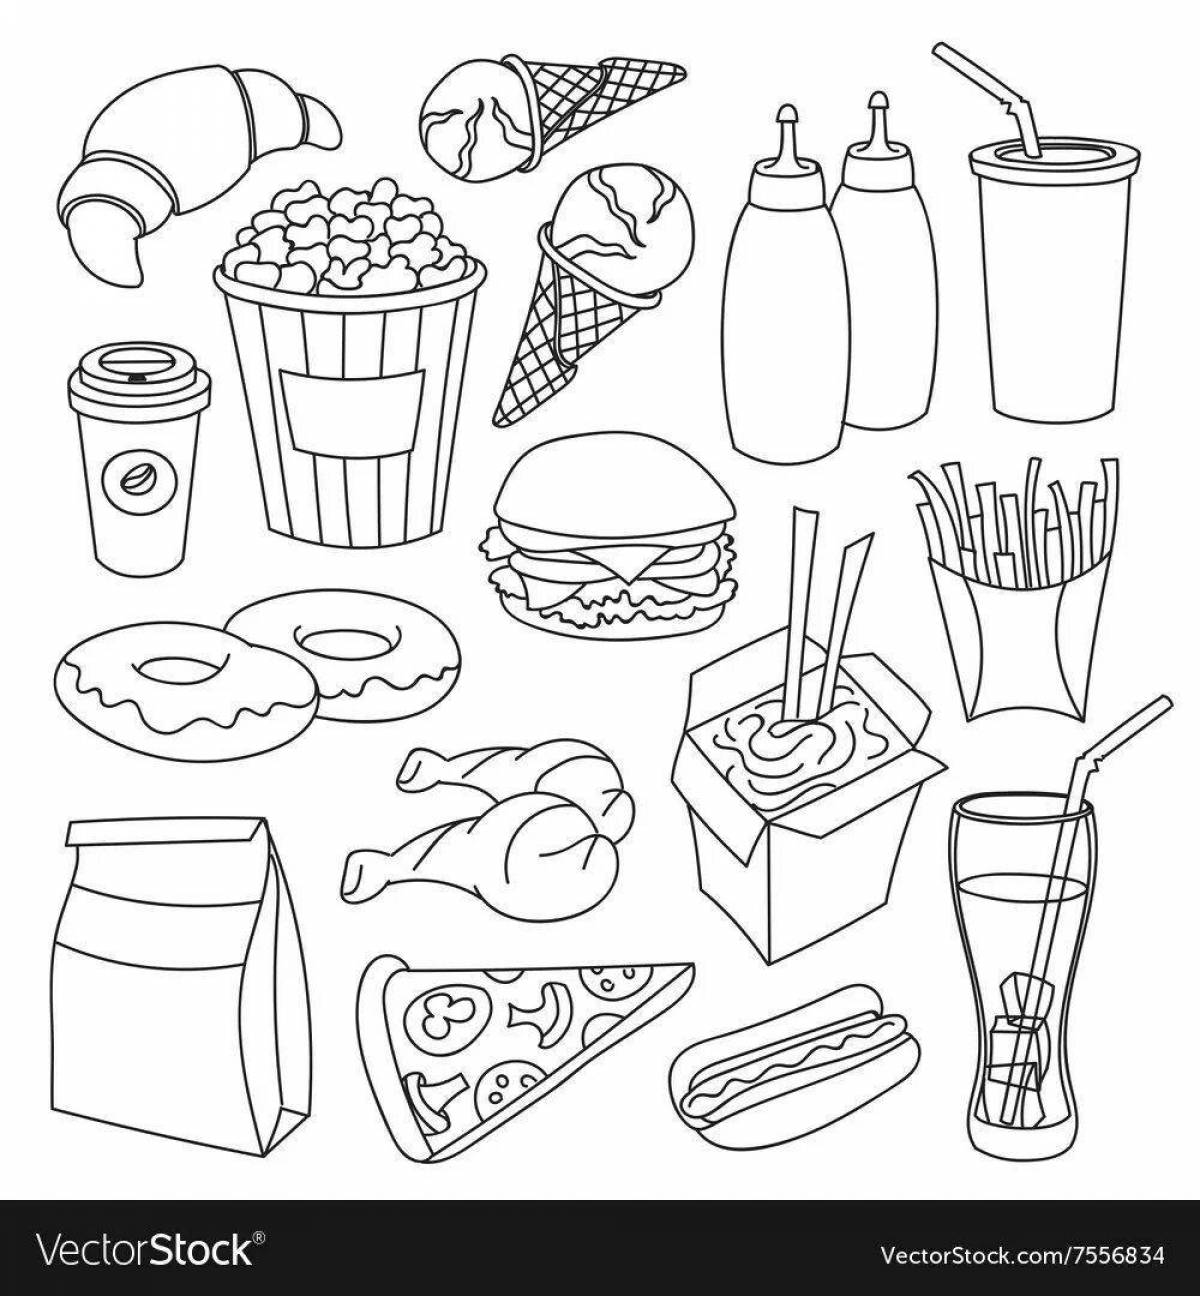 Coloring page blindingly harmful foods